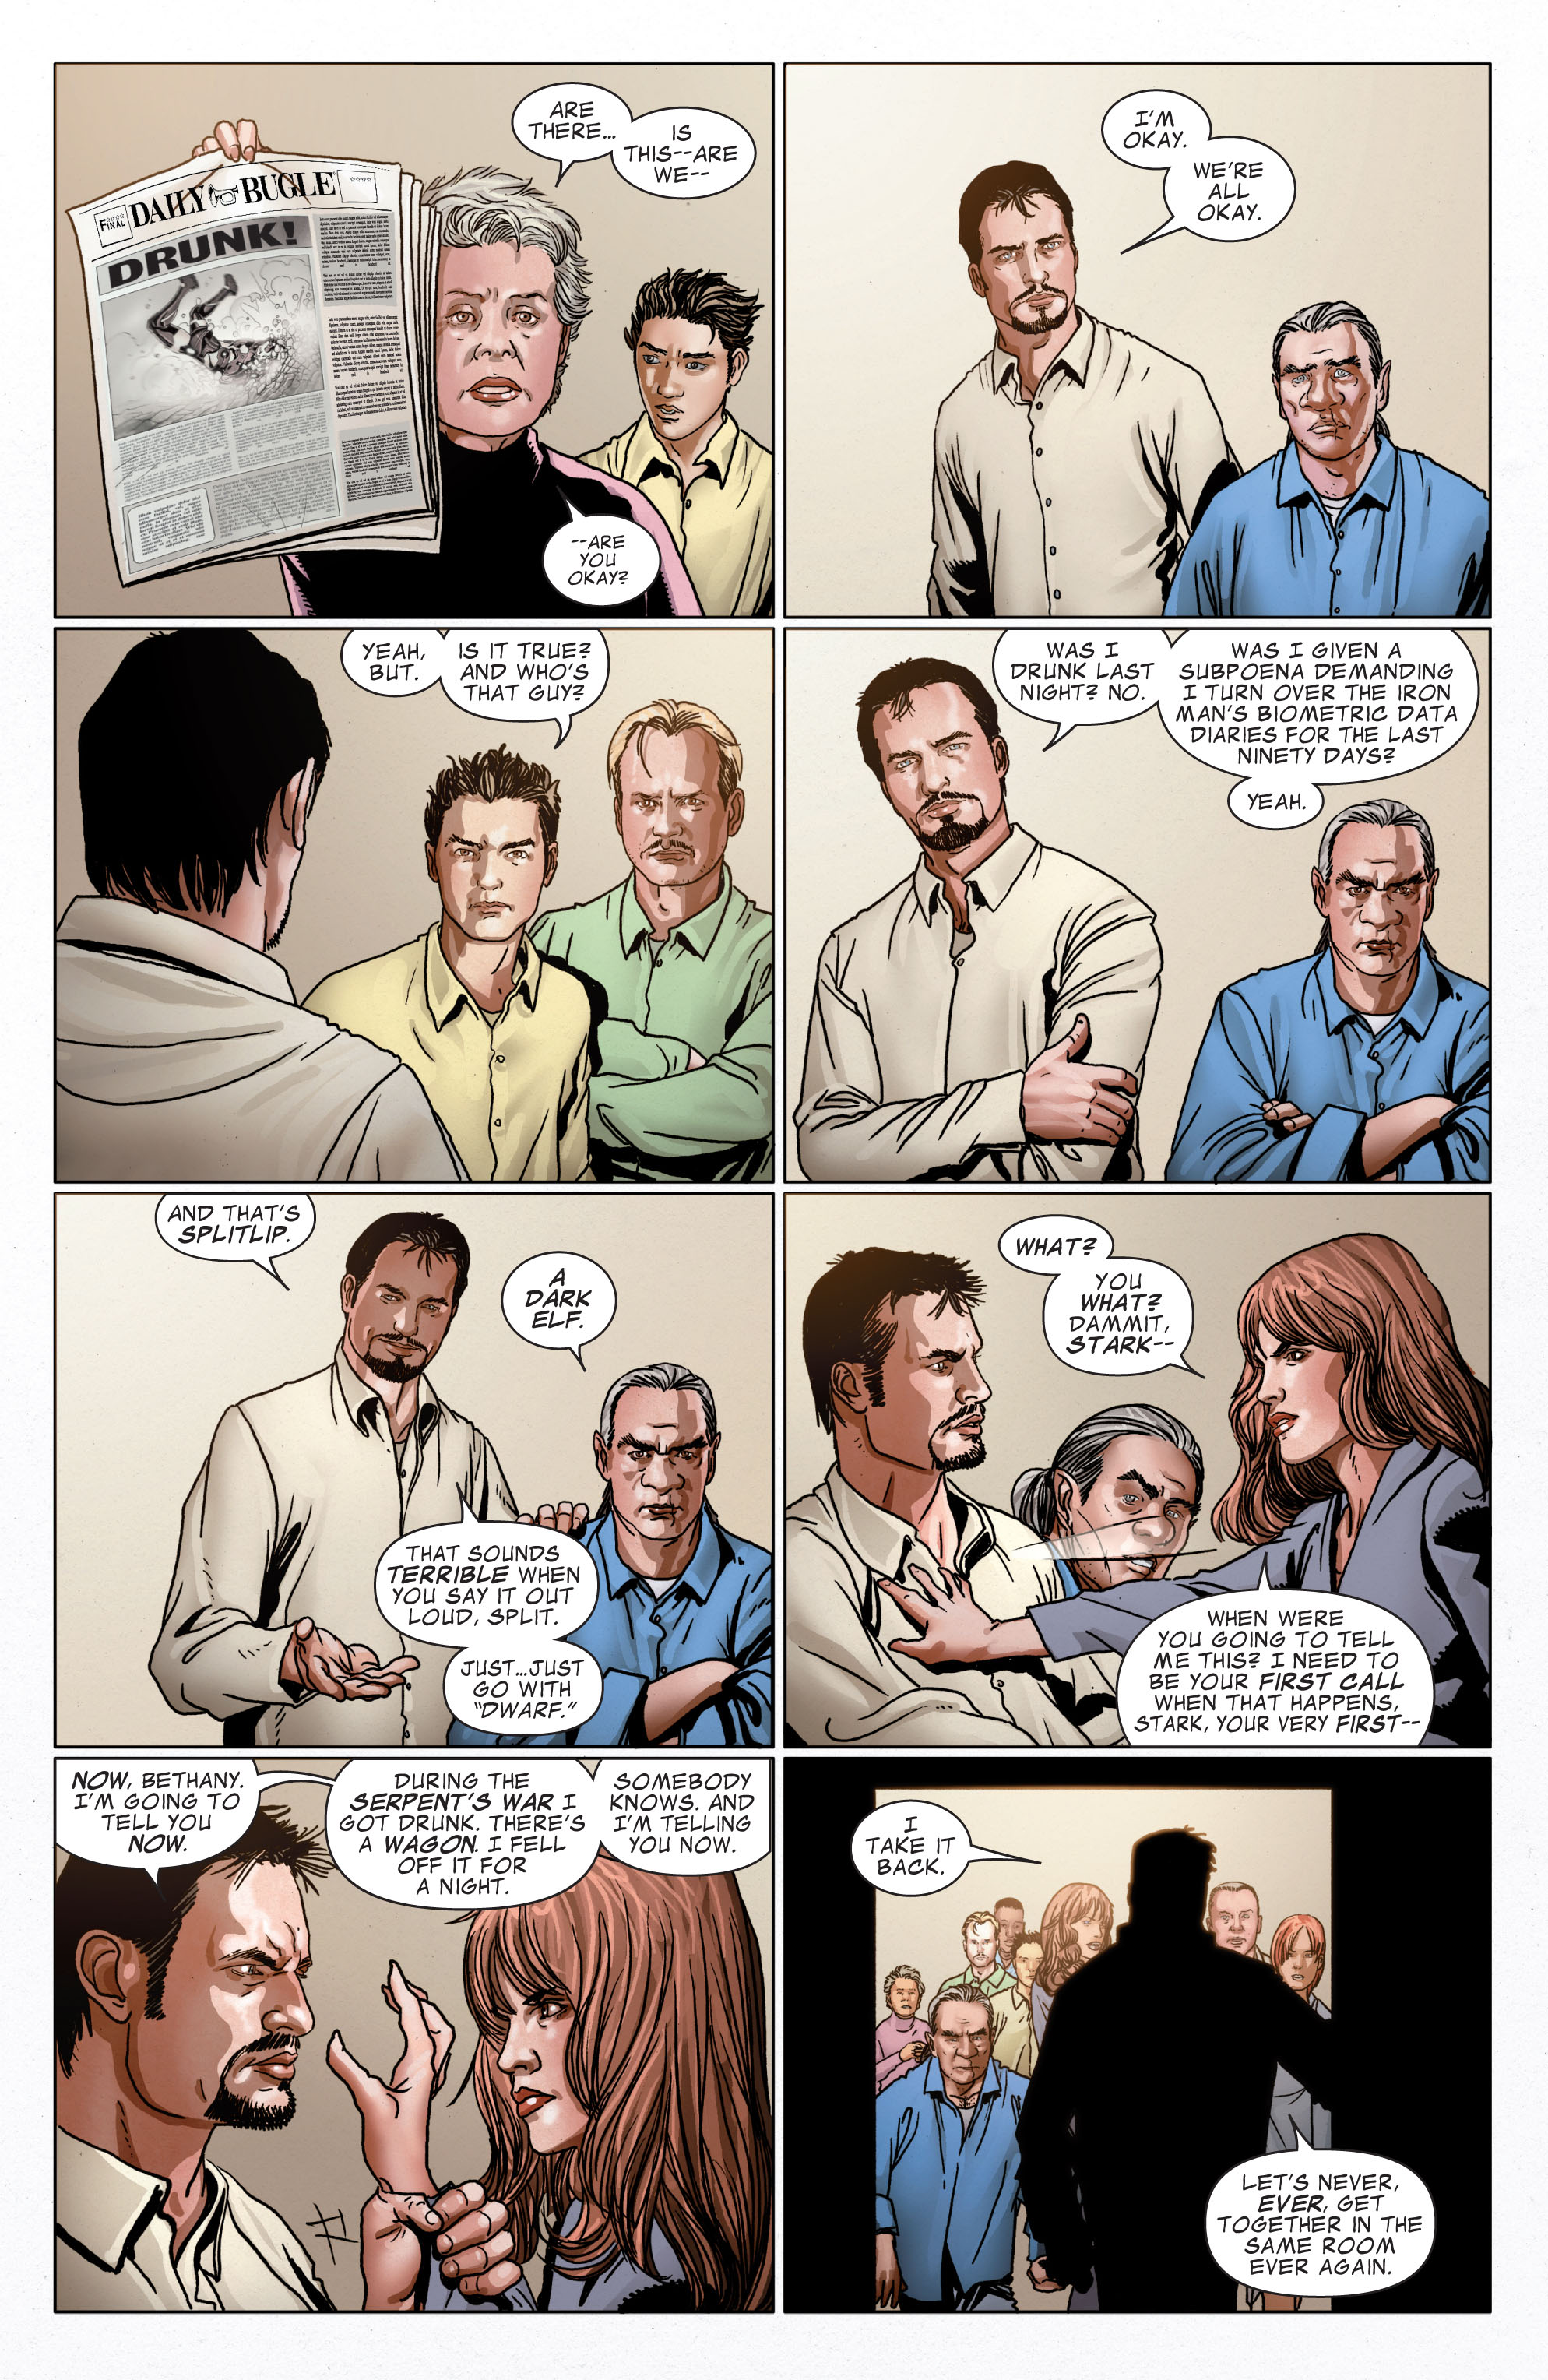 Invincible Iron Man (2008) 511 Page 4